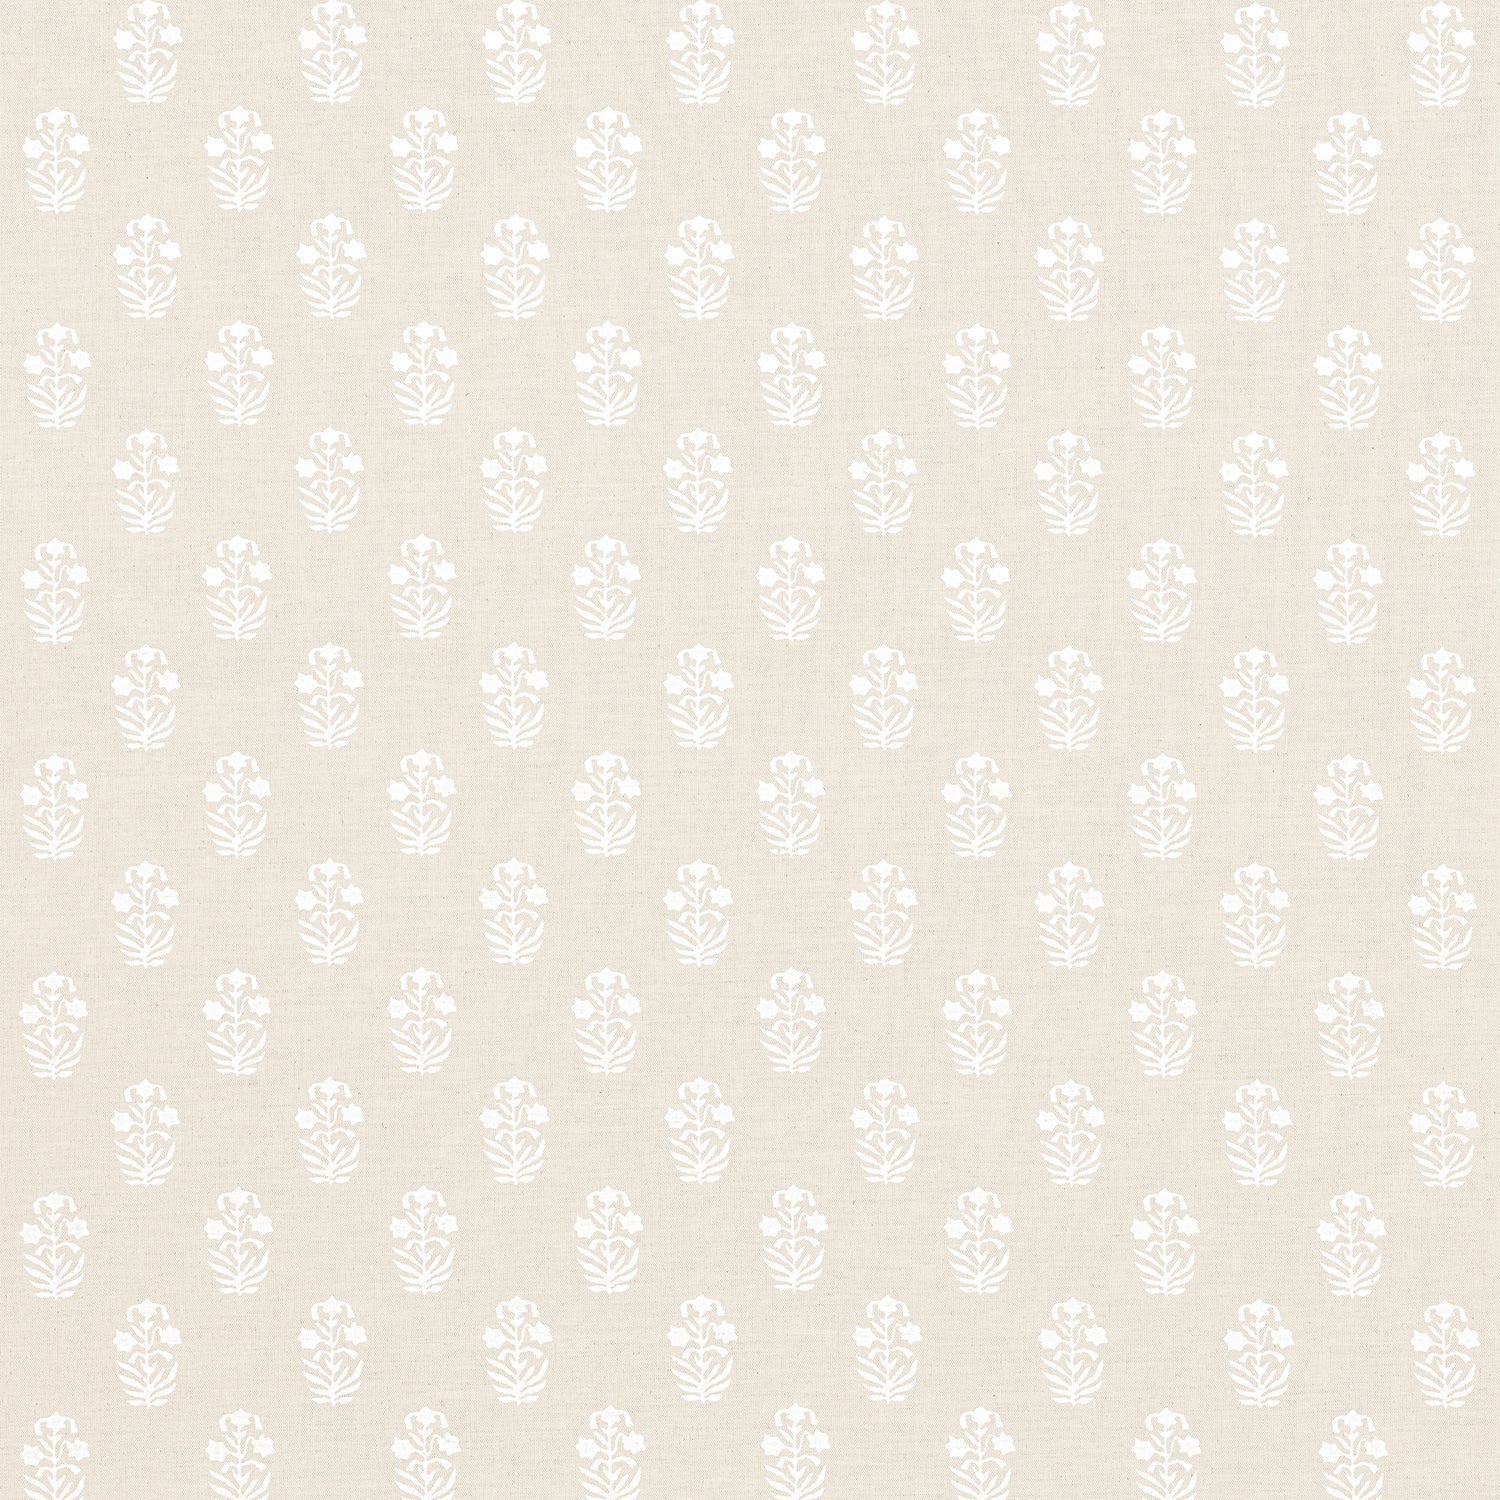 Corwin fabric in white on natural color - pattern number F936405 - by Thibaut in the Indienne collection